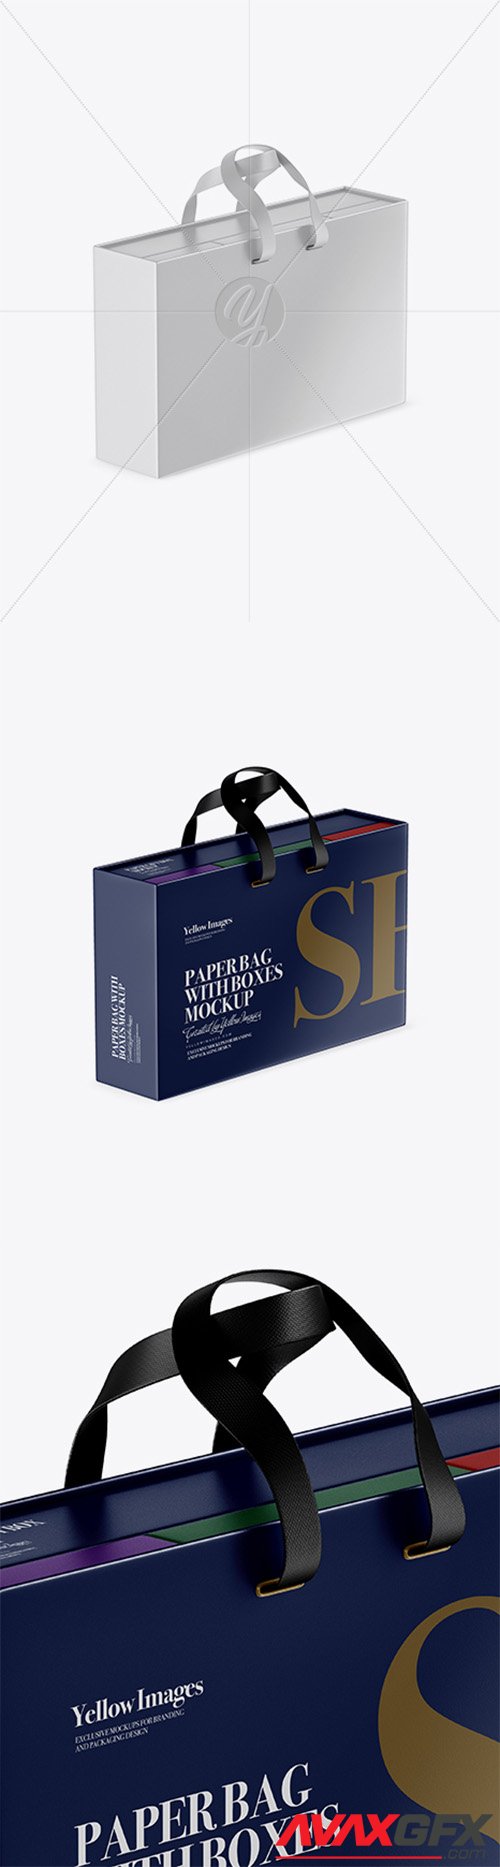 Matte Paper Bag With Boxes Mockup - Half Side View 22634